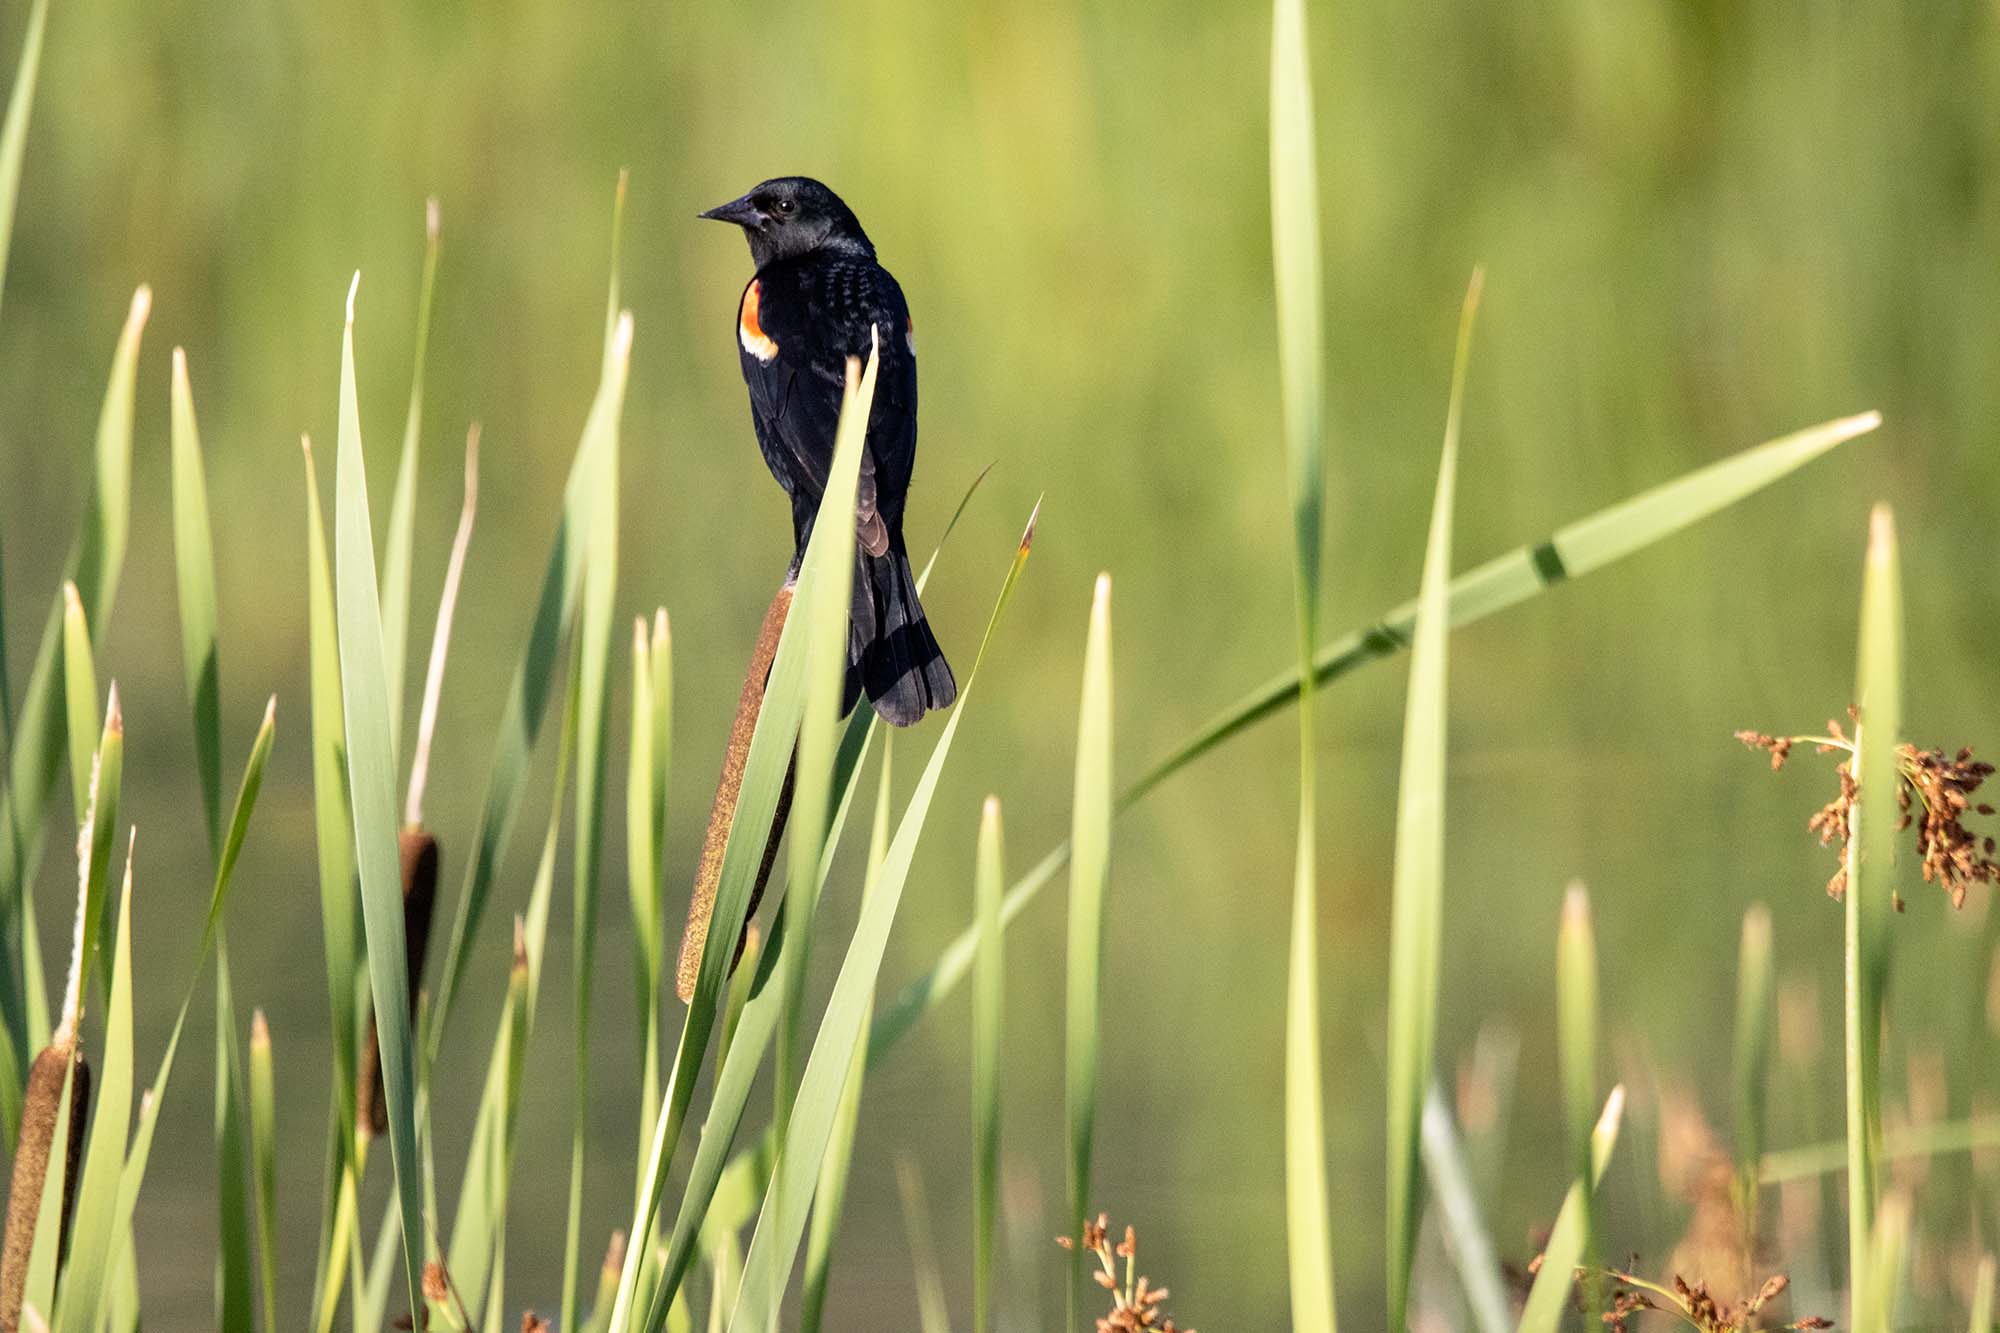 A red-winged blackbird perched on greenery